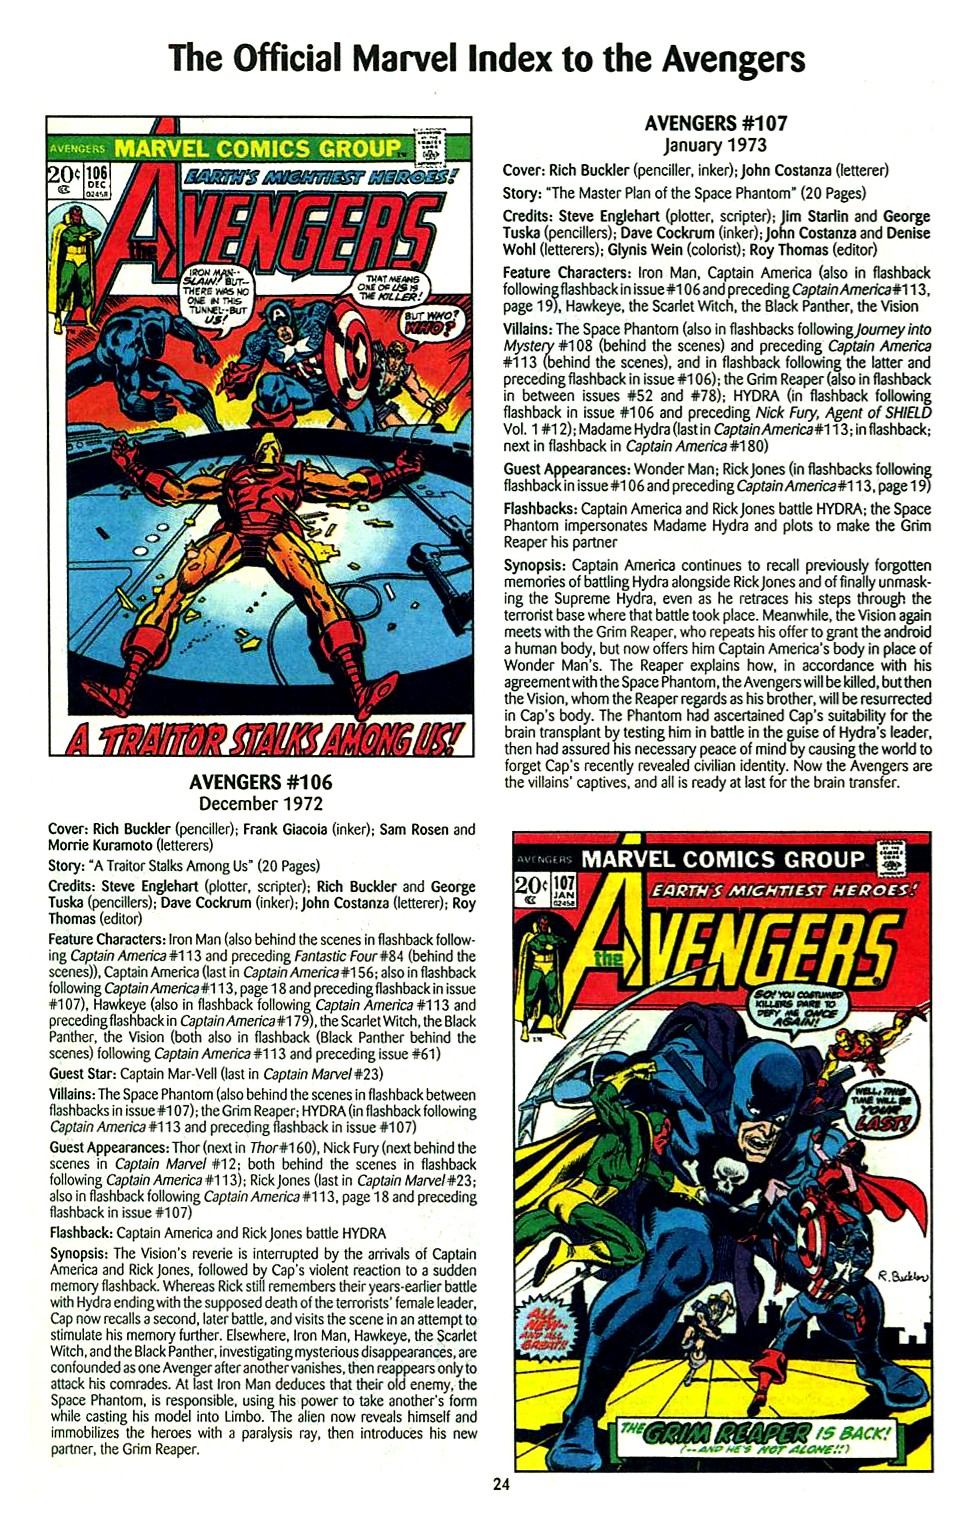 Read online The Official Marvel Index to the Avengers comic -  Issue #2 - 26